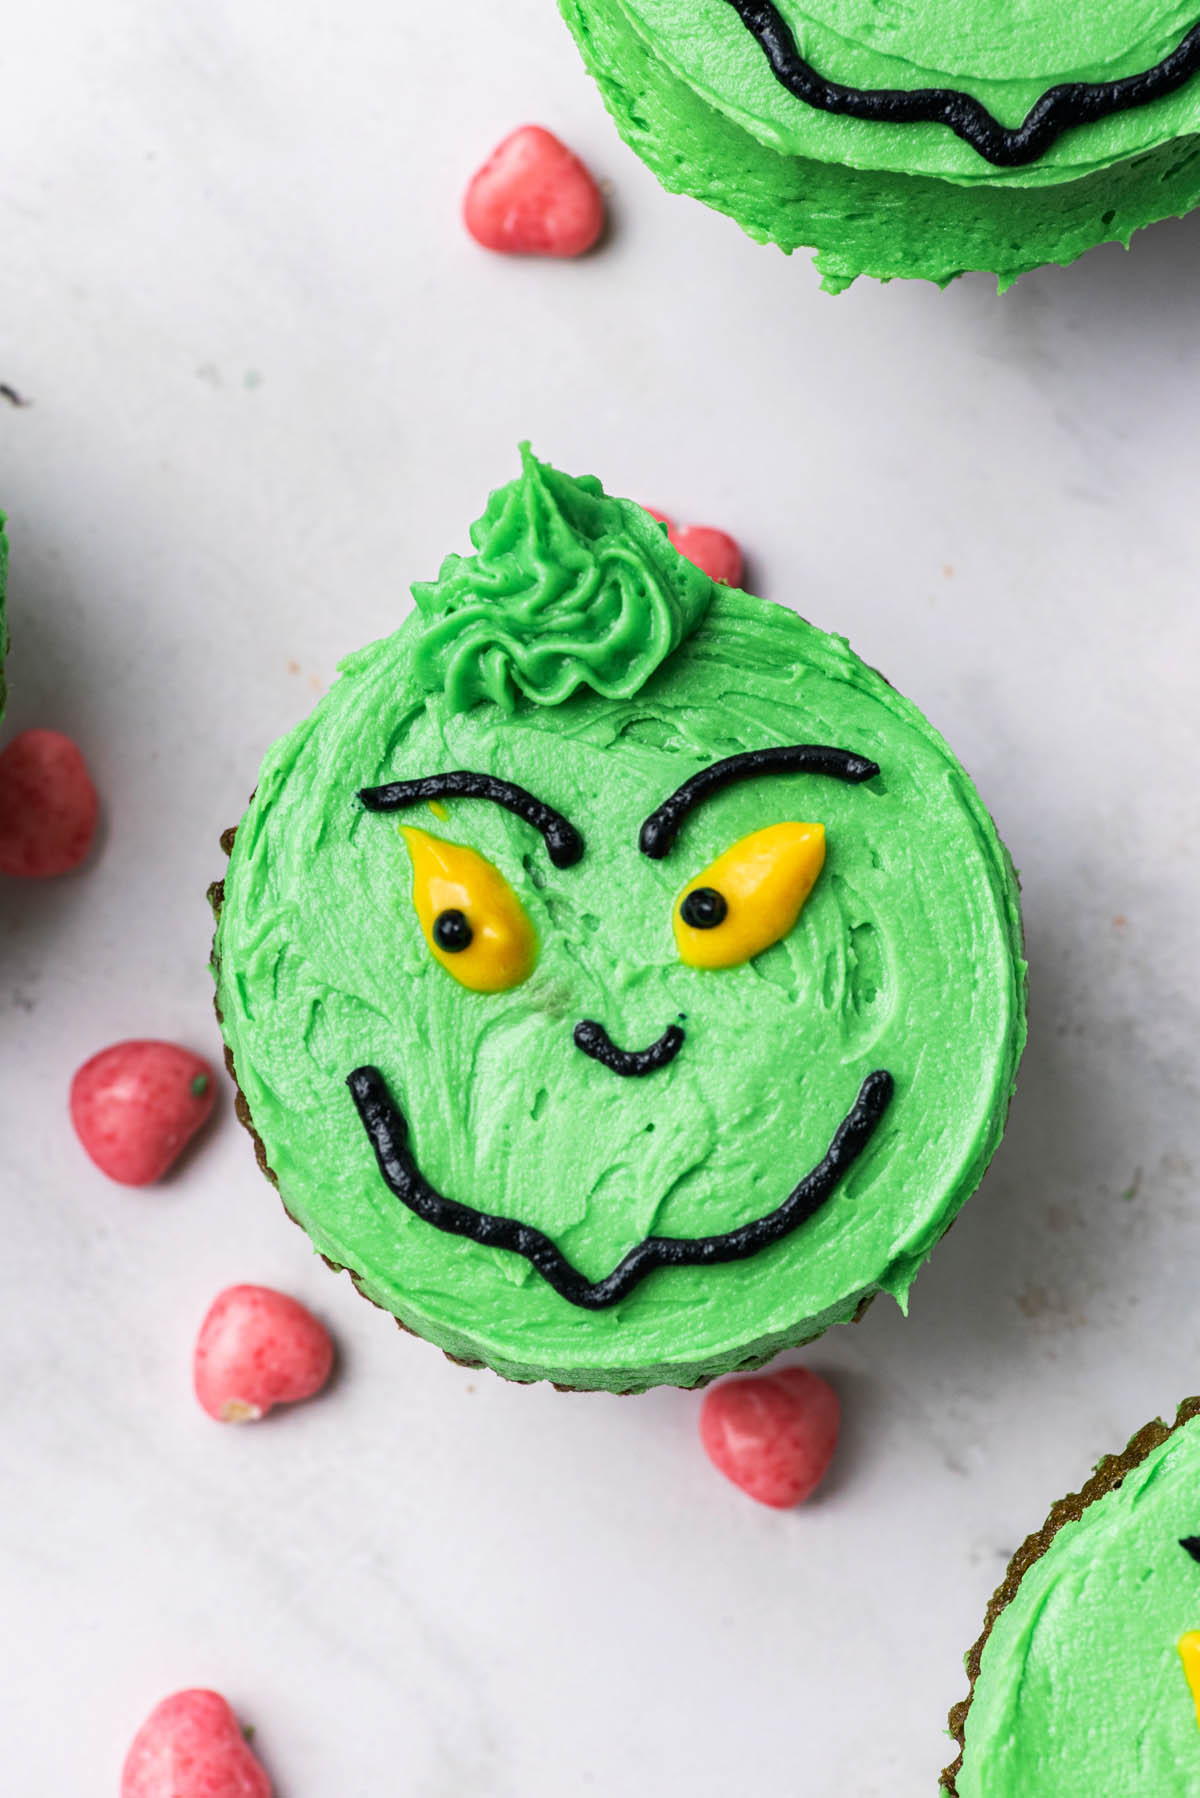 Closer image of a green-iced cupcake with frosting piped to look like the grinch.